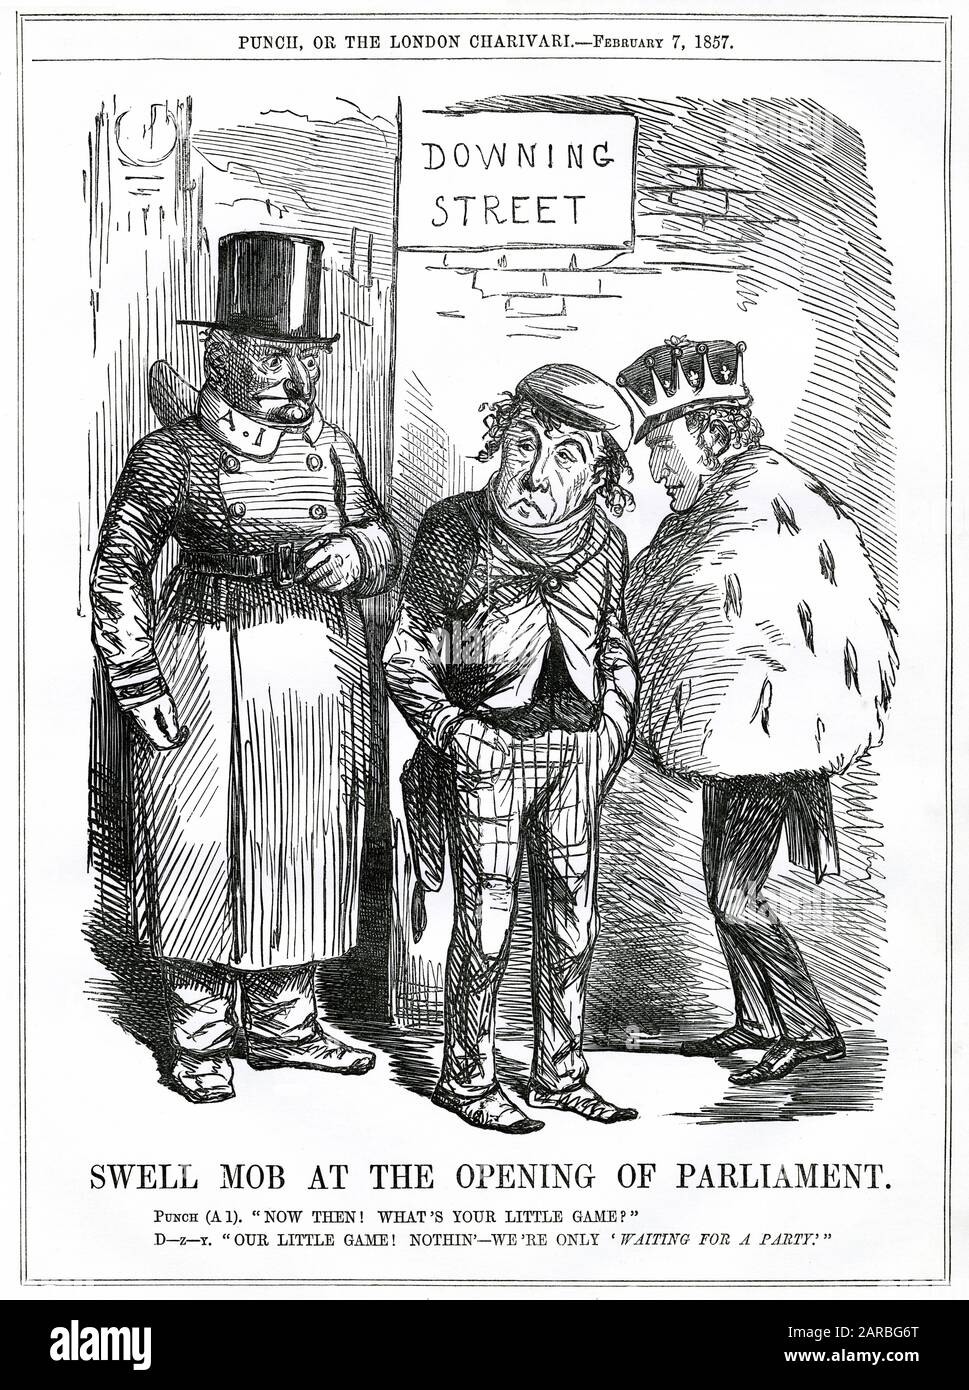 Cartoon, Swell Mob at the Opening of Parliament -- satirical comment on Conservative MPs such as Benjamin Disraeli and Lord Derby, 'waiting for a party', in other words hoping to attract members of the Peelite faction to strengthen their ranks. Their rival, Lord Palmerston, had just won a general election for the Whig party. Stock Photo